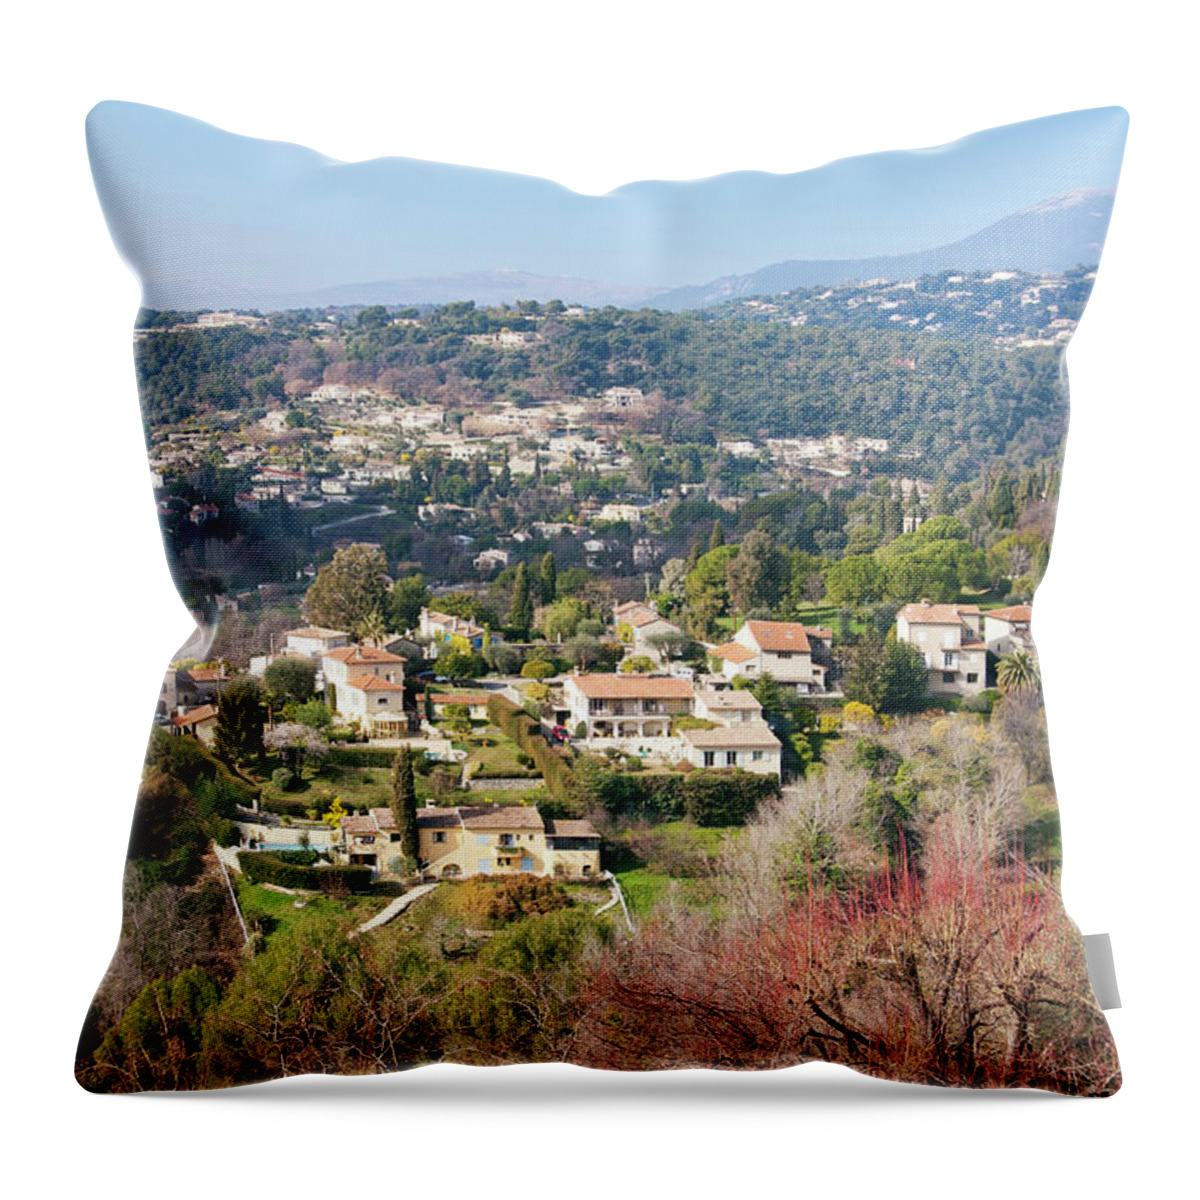 French Riviera Throw Pillow featuring the photograph Landscape In The South Of France by Typo-graphics